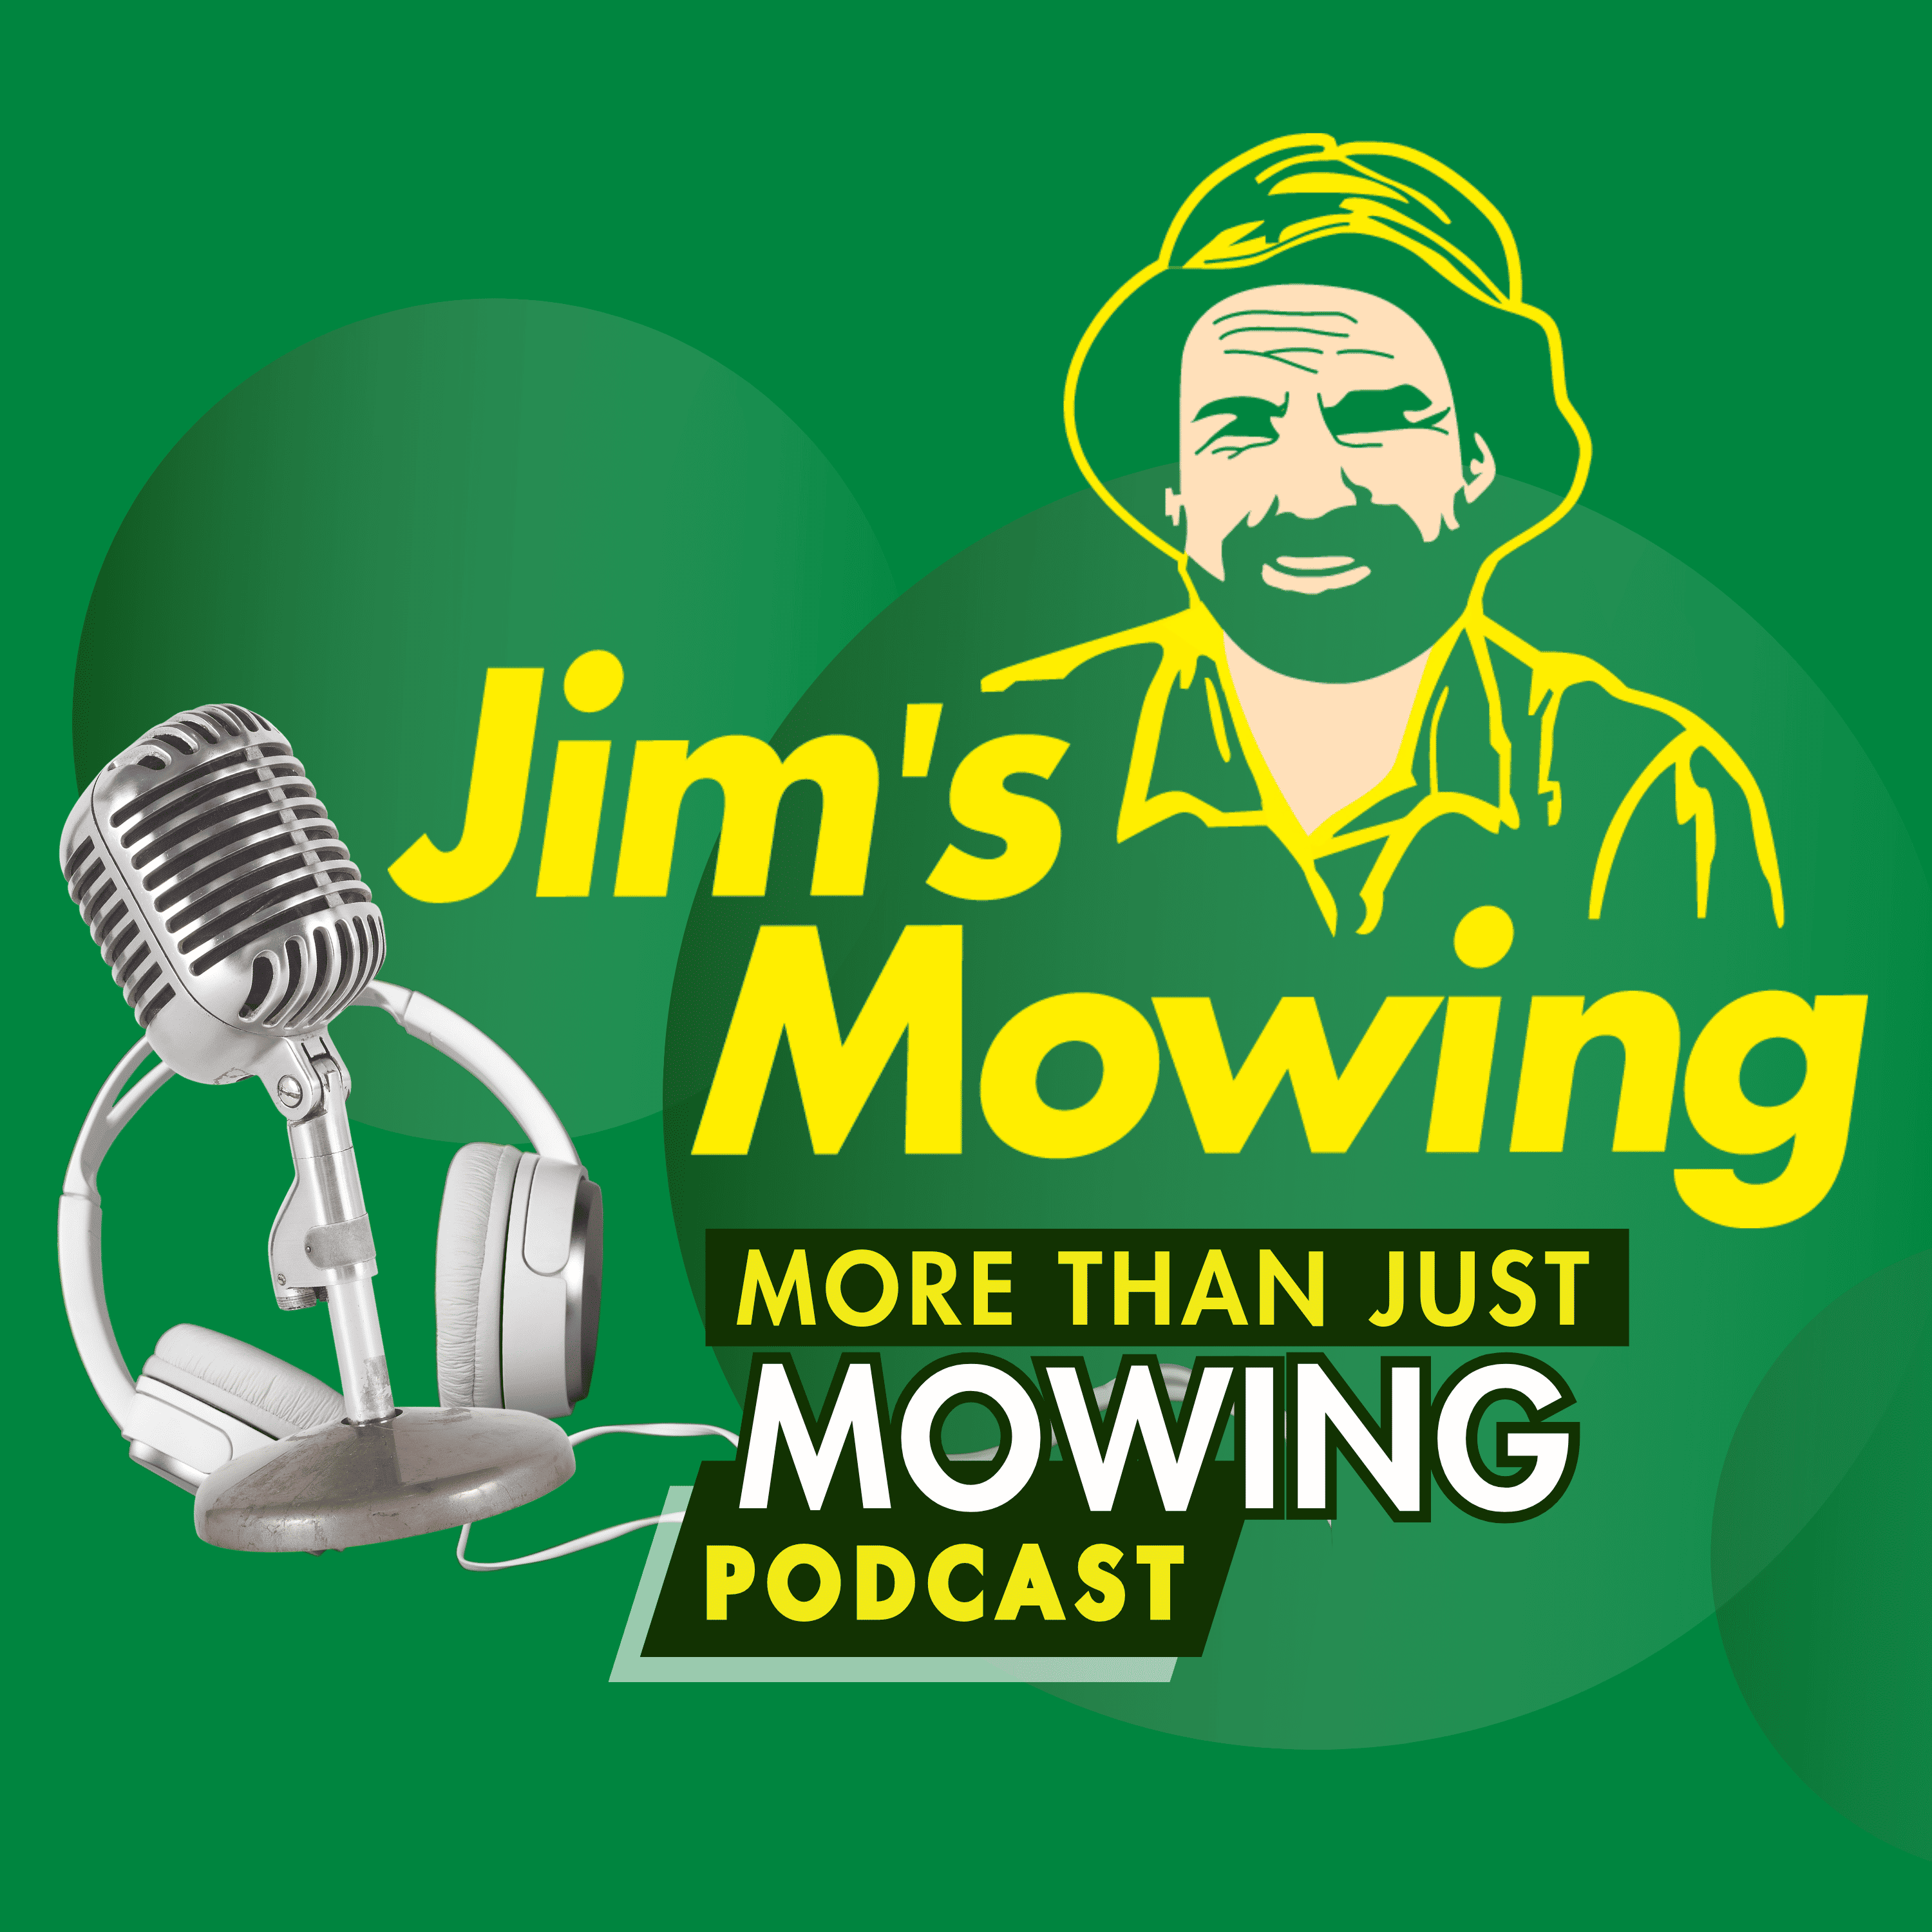 More than just mowing hosted by Joel Kleber for Jim's Mowing